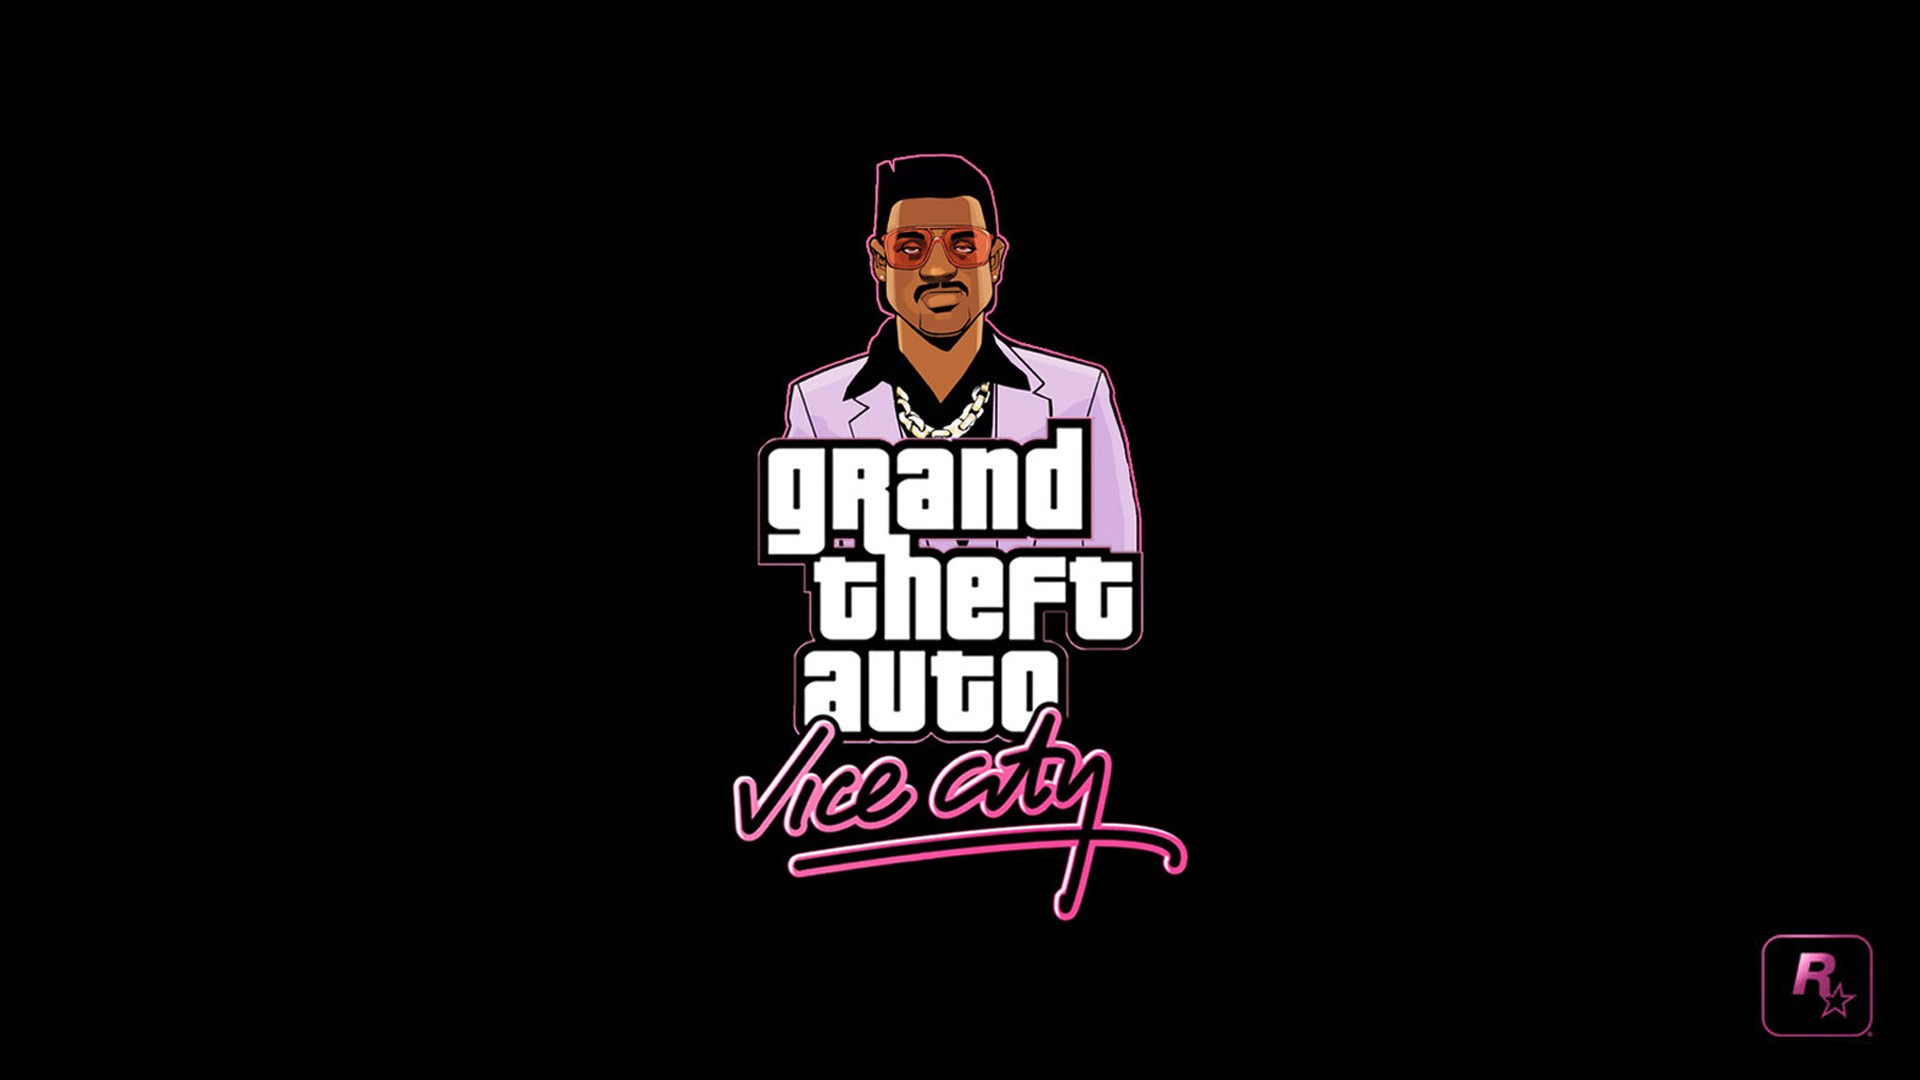 1920x1080 Wallpaper : video games, Grand Theft Auto Vice City, Rockstar Games, Grand Theft Auto, brand, PlayStation 2, album cover microcosmos 49487 HD Wallpapers